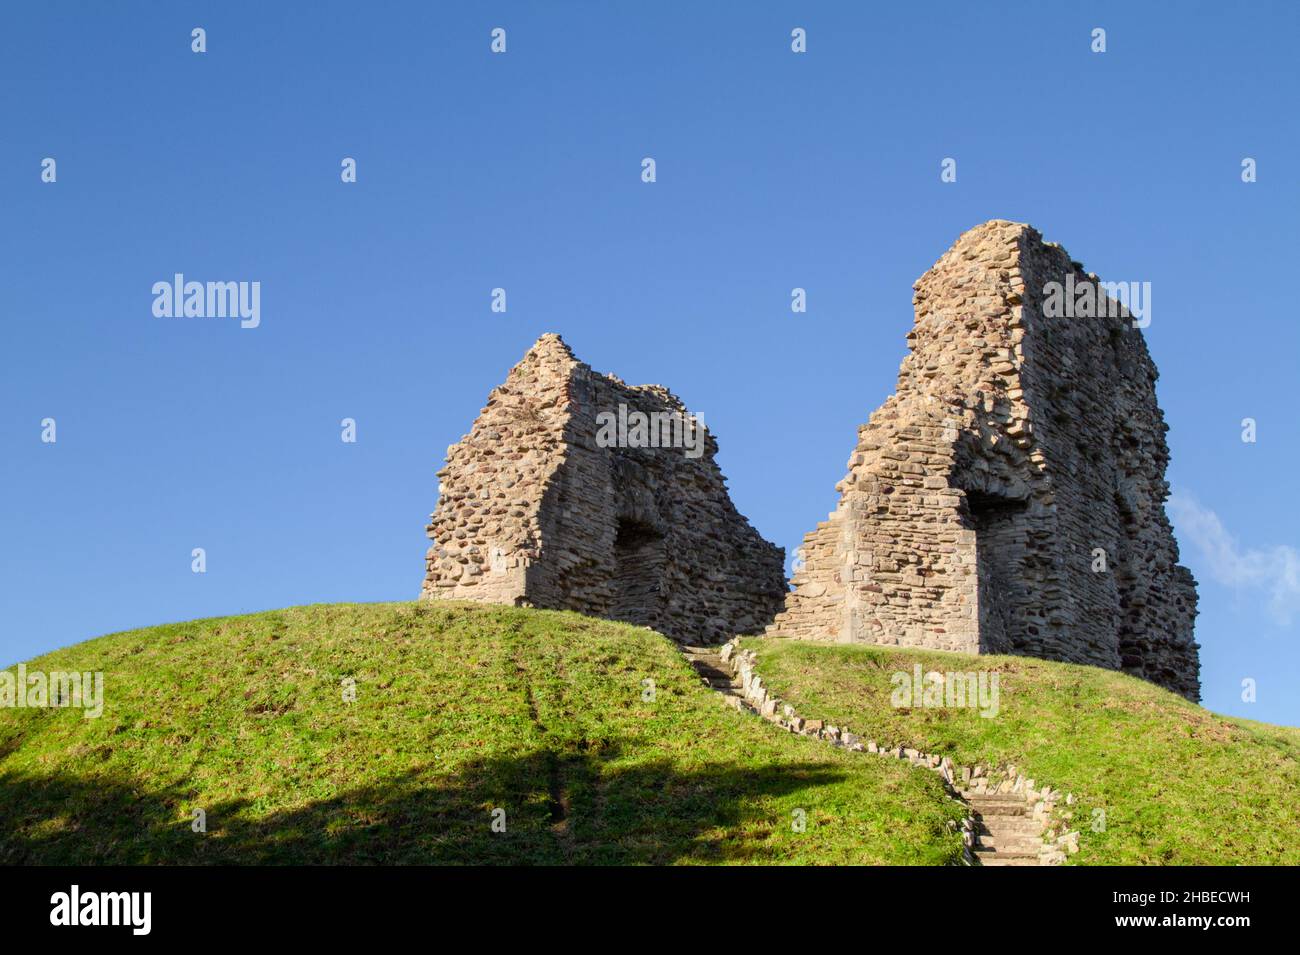 Ruins Of Norman Christchurch Castle On A Mound, 12th Century, Christchurch UK Stock Photo